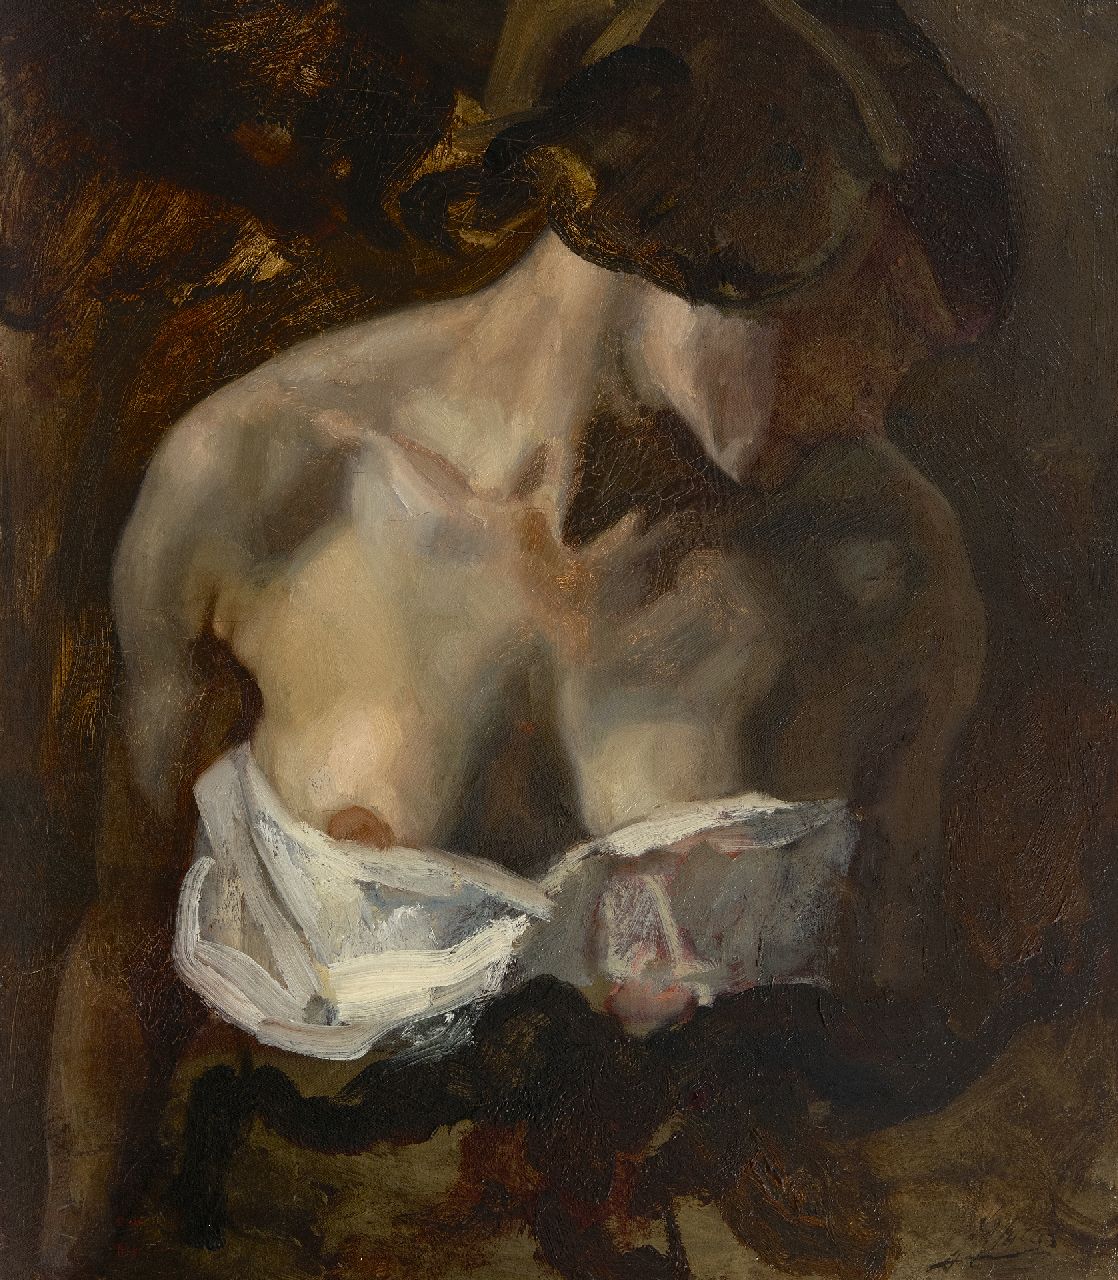 Jurres J.H.  | Johannes Hendricus Jurres | Paintings offered for sale | Bare-chested Delilah (study for Samson and Delilah), oil on canvas 52.3 x 45.5 cm, signed l.r.